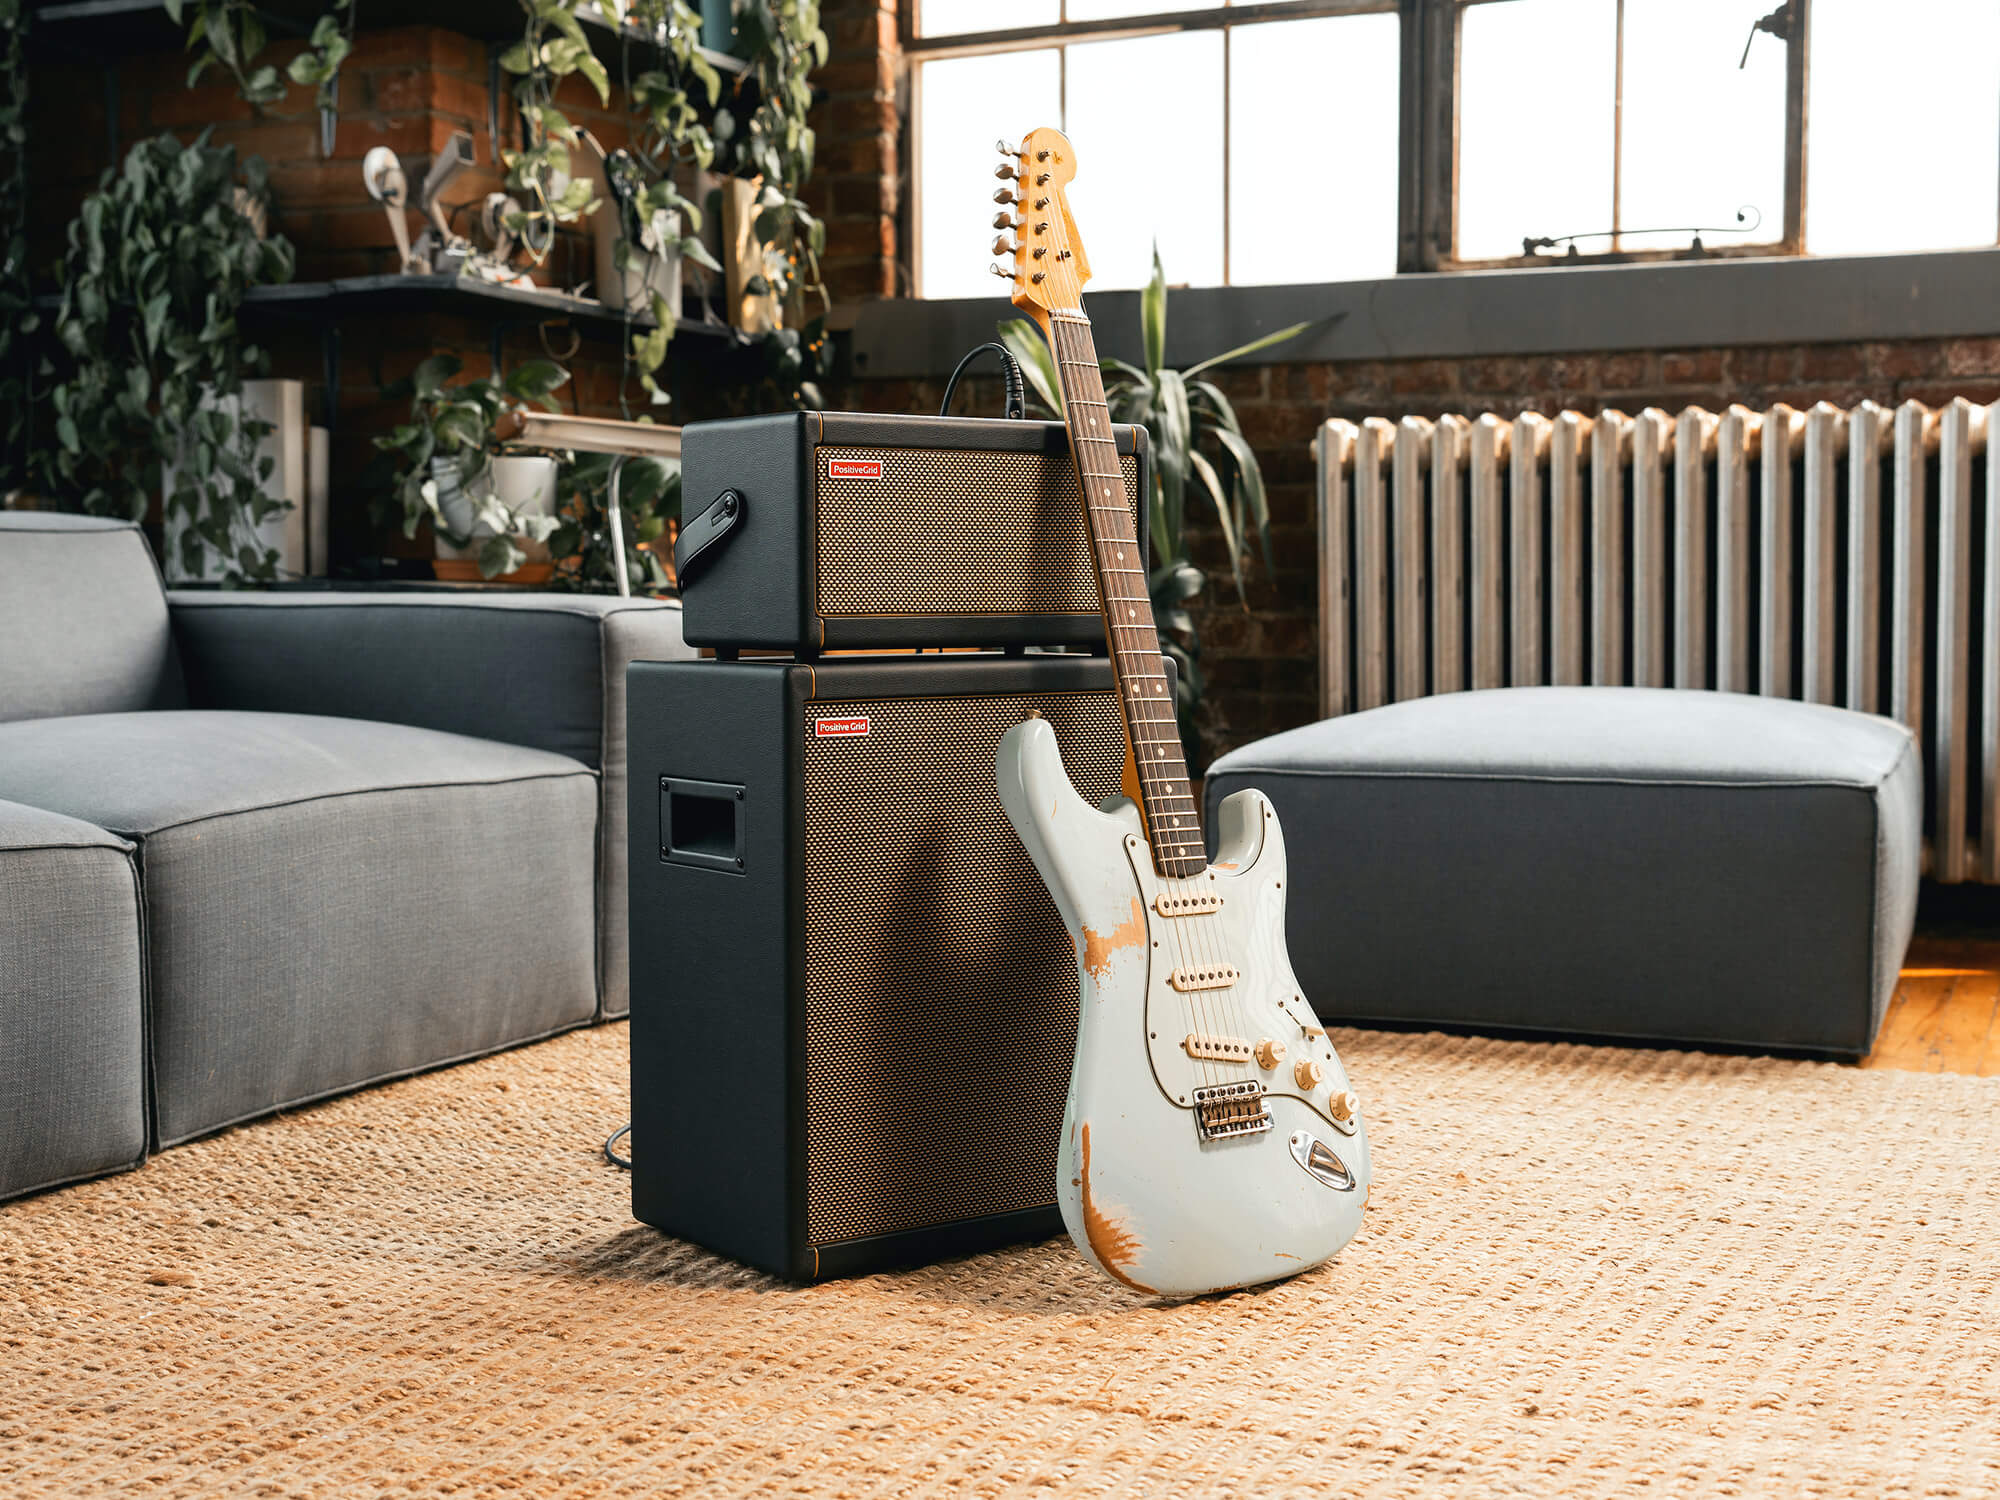 Positive Grid Spark CAB in a home environment, with a white Strat guitar leaning against it. It has a black outer shell and a brown grille.